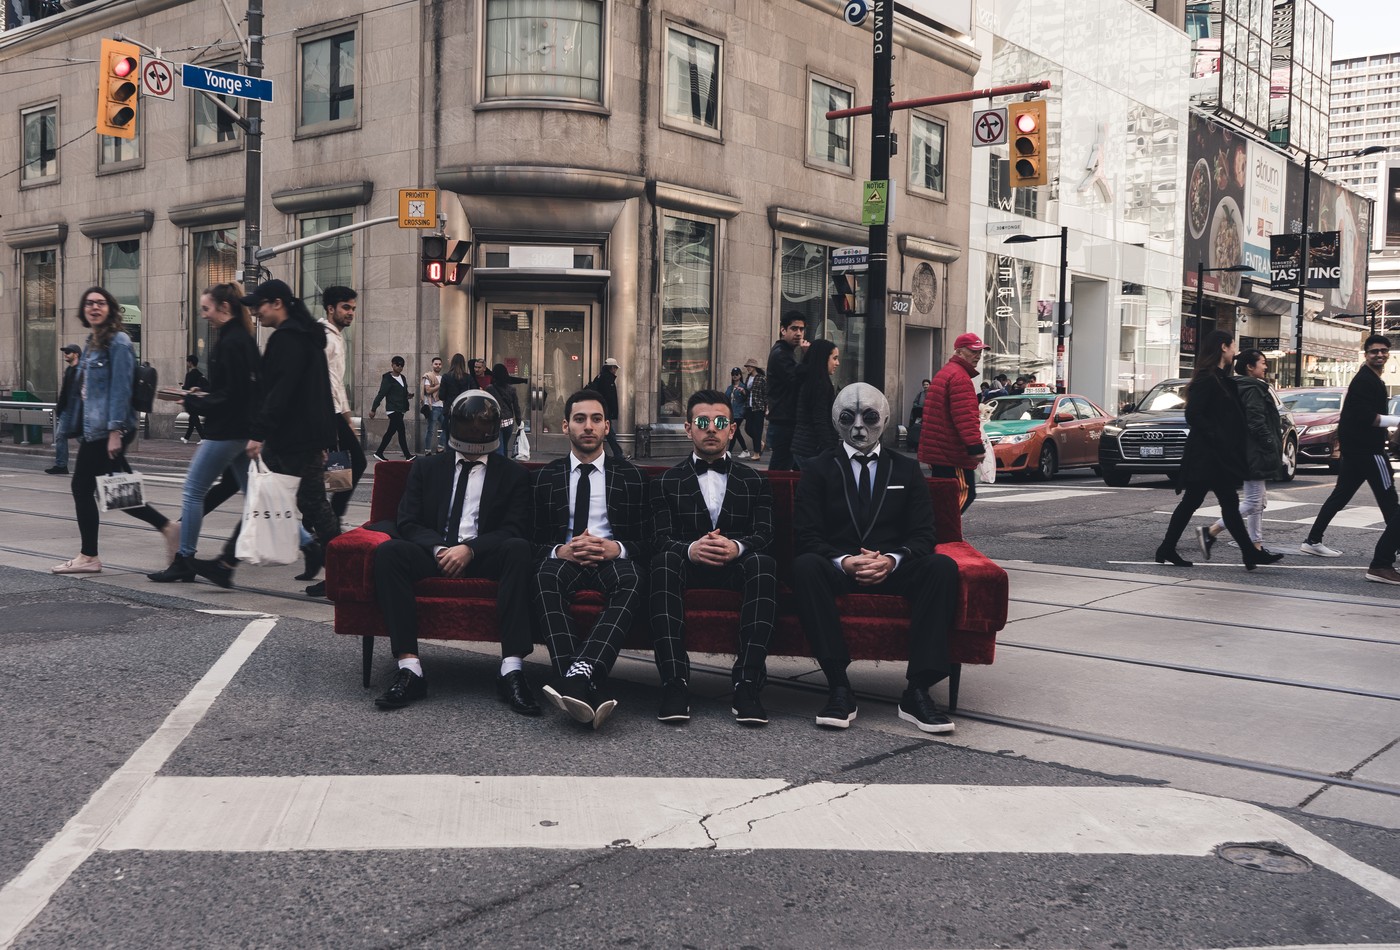 Four people sitting on a couch in the intersection of Dundas and Yonge Streets in Toronto